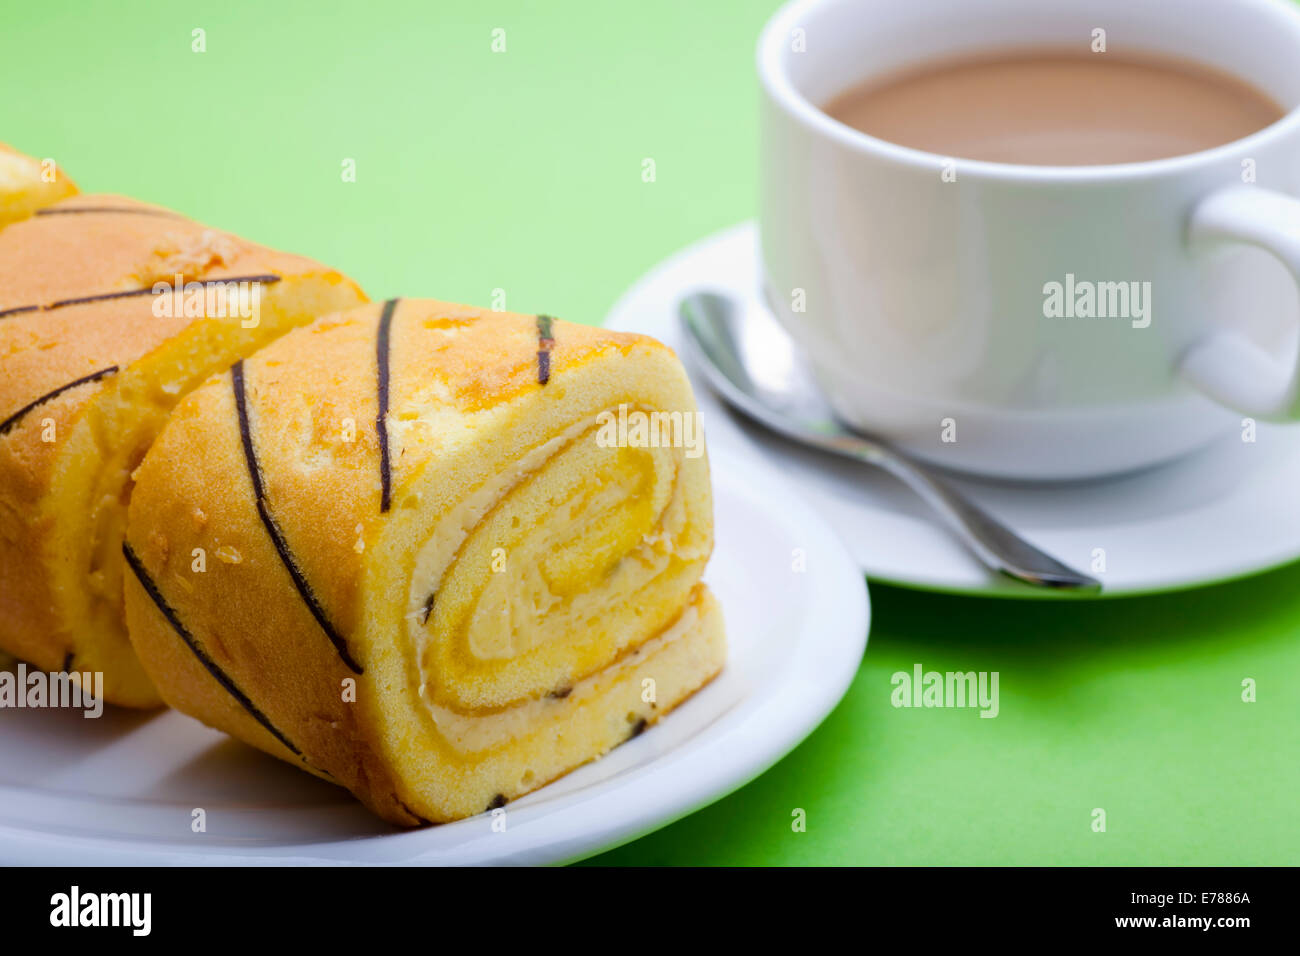 Breakfast: roll cakes and coffee Stock Photo